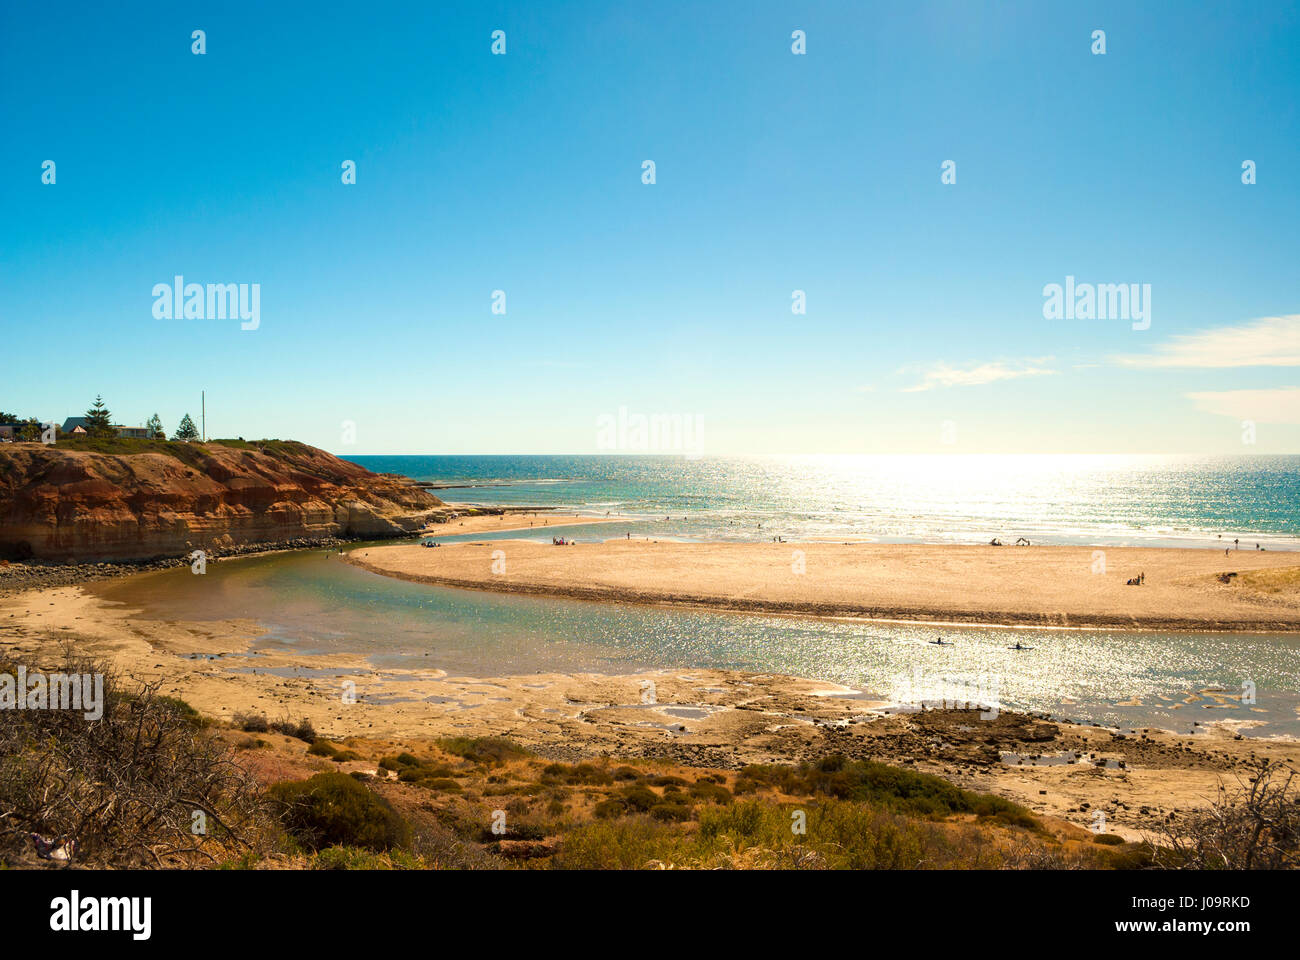 Summer fun on Southport Beach, where Port Noarlunga and Port Noarlunga South suburbs meet, divided by the Onkaparinga river estuary in South Australia Stock Photo